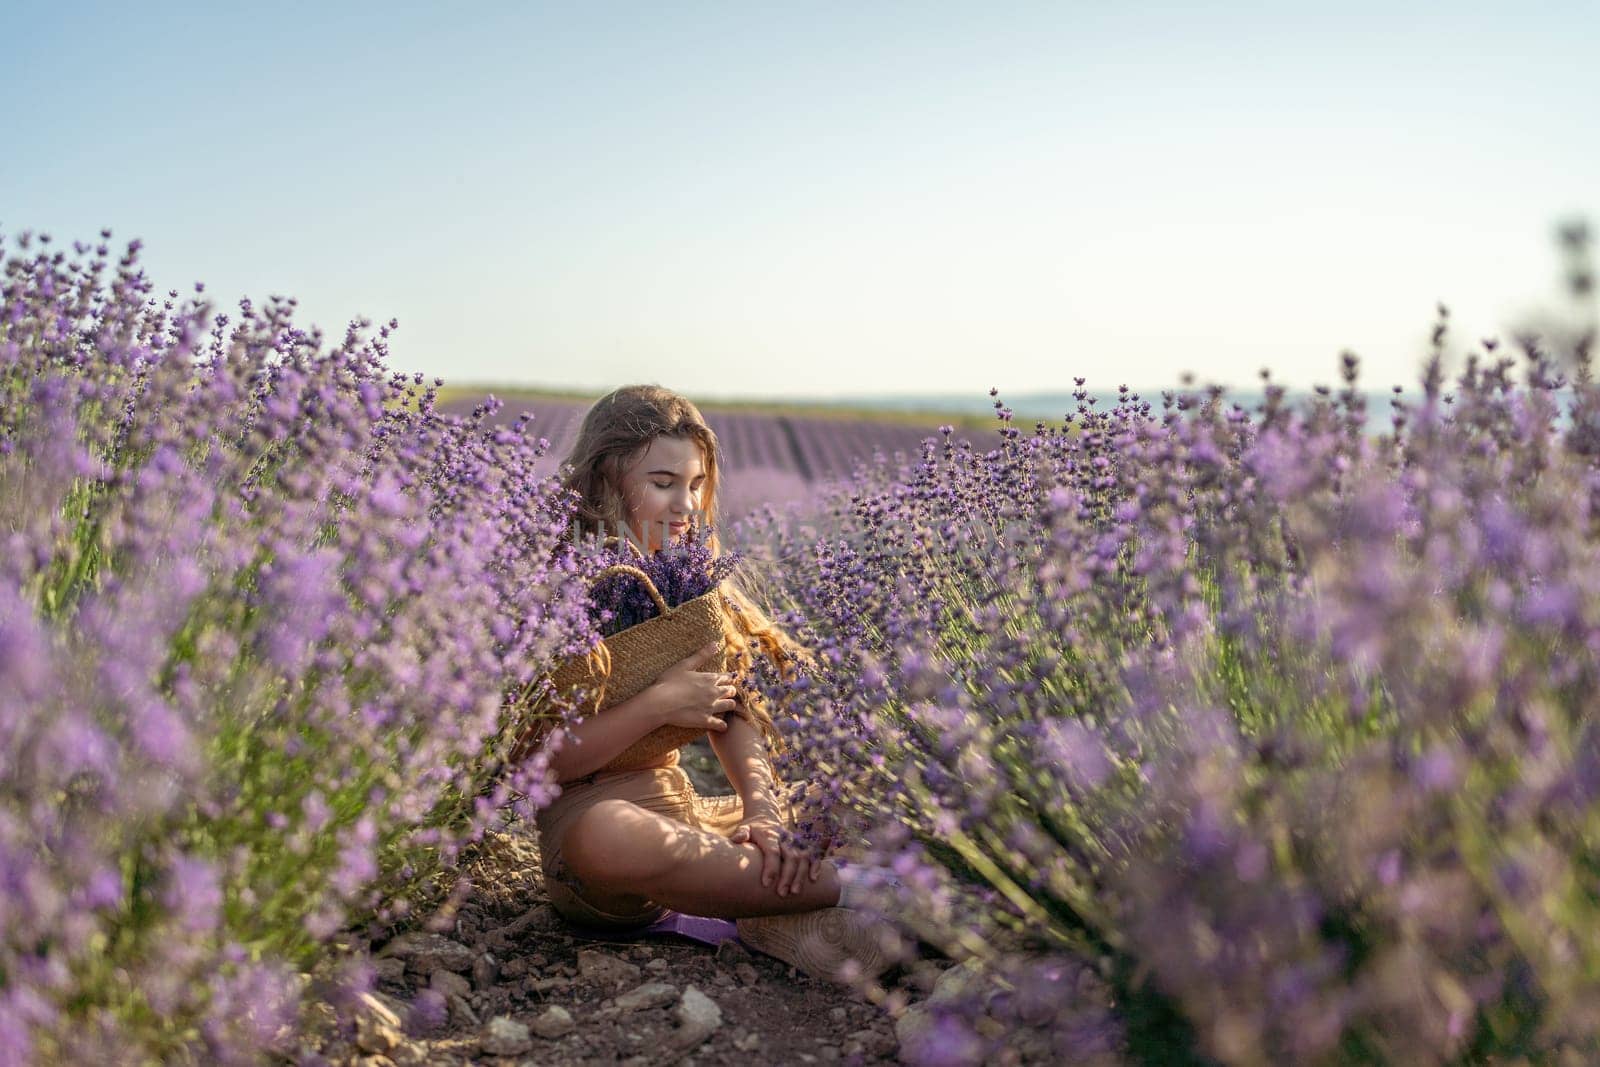 Girl is sitting in a field of purple flowers. She is holding a basket of flowers and smiling. Scene is peaceful and serene, as the girl is surrounded by the beauty of nature